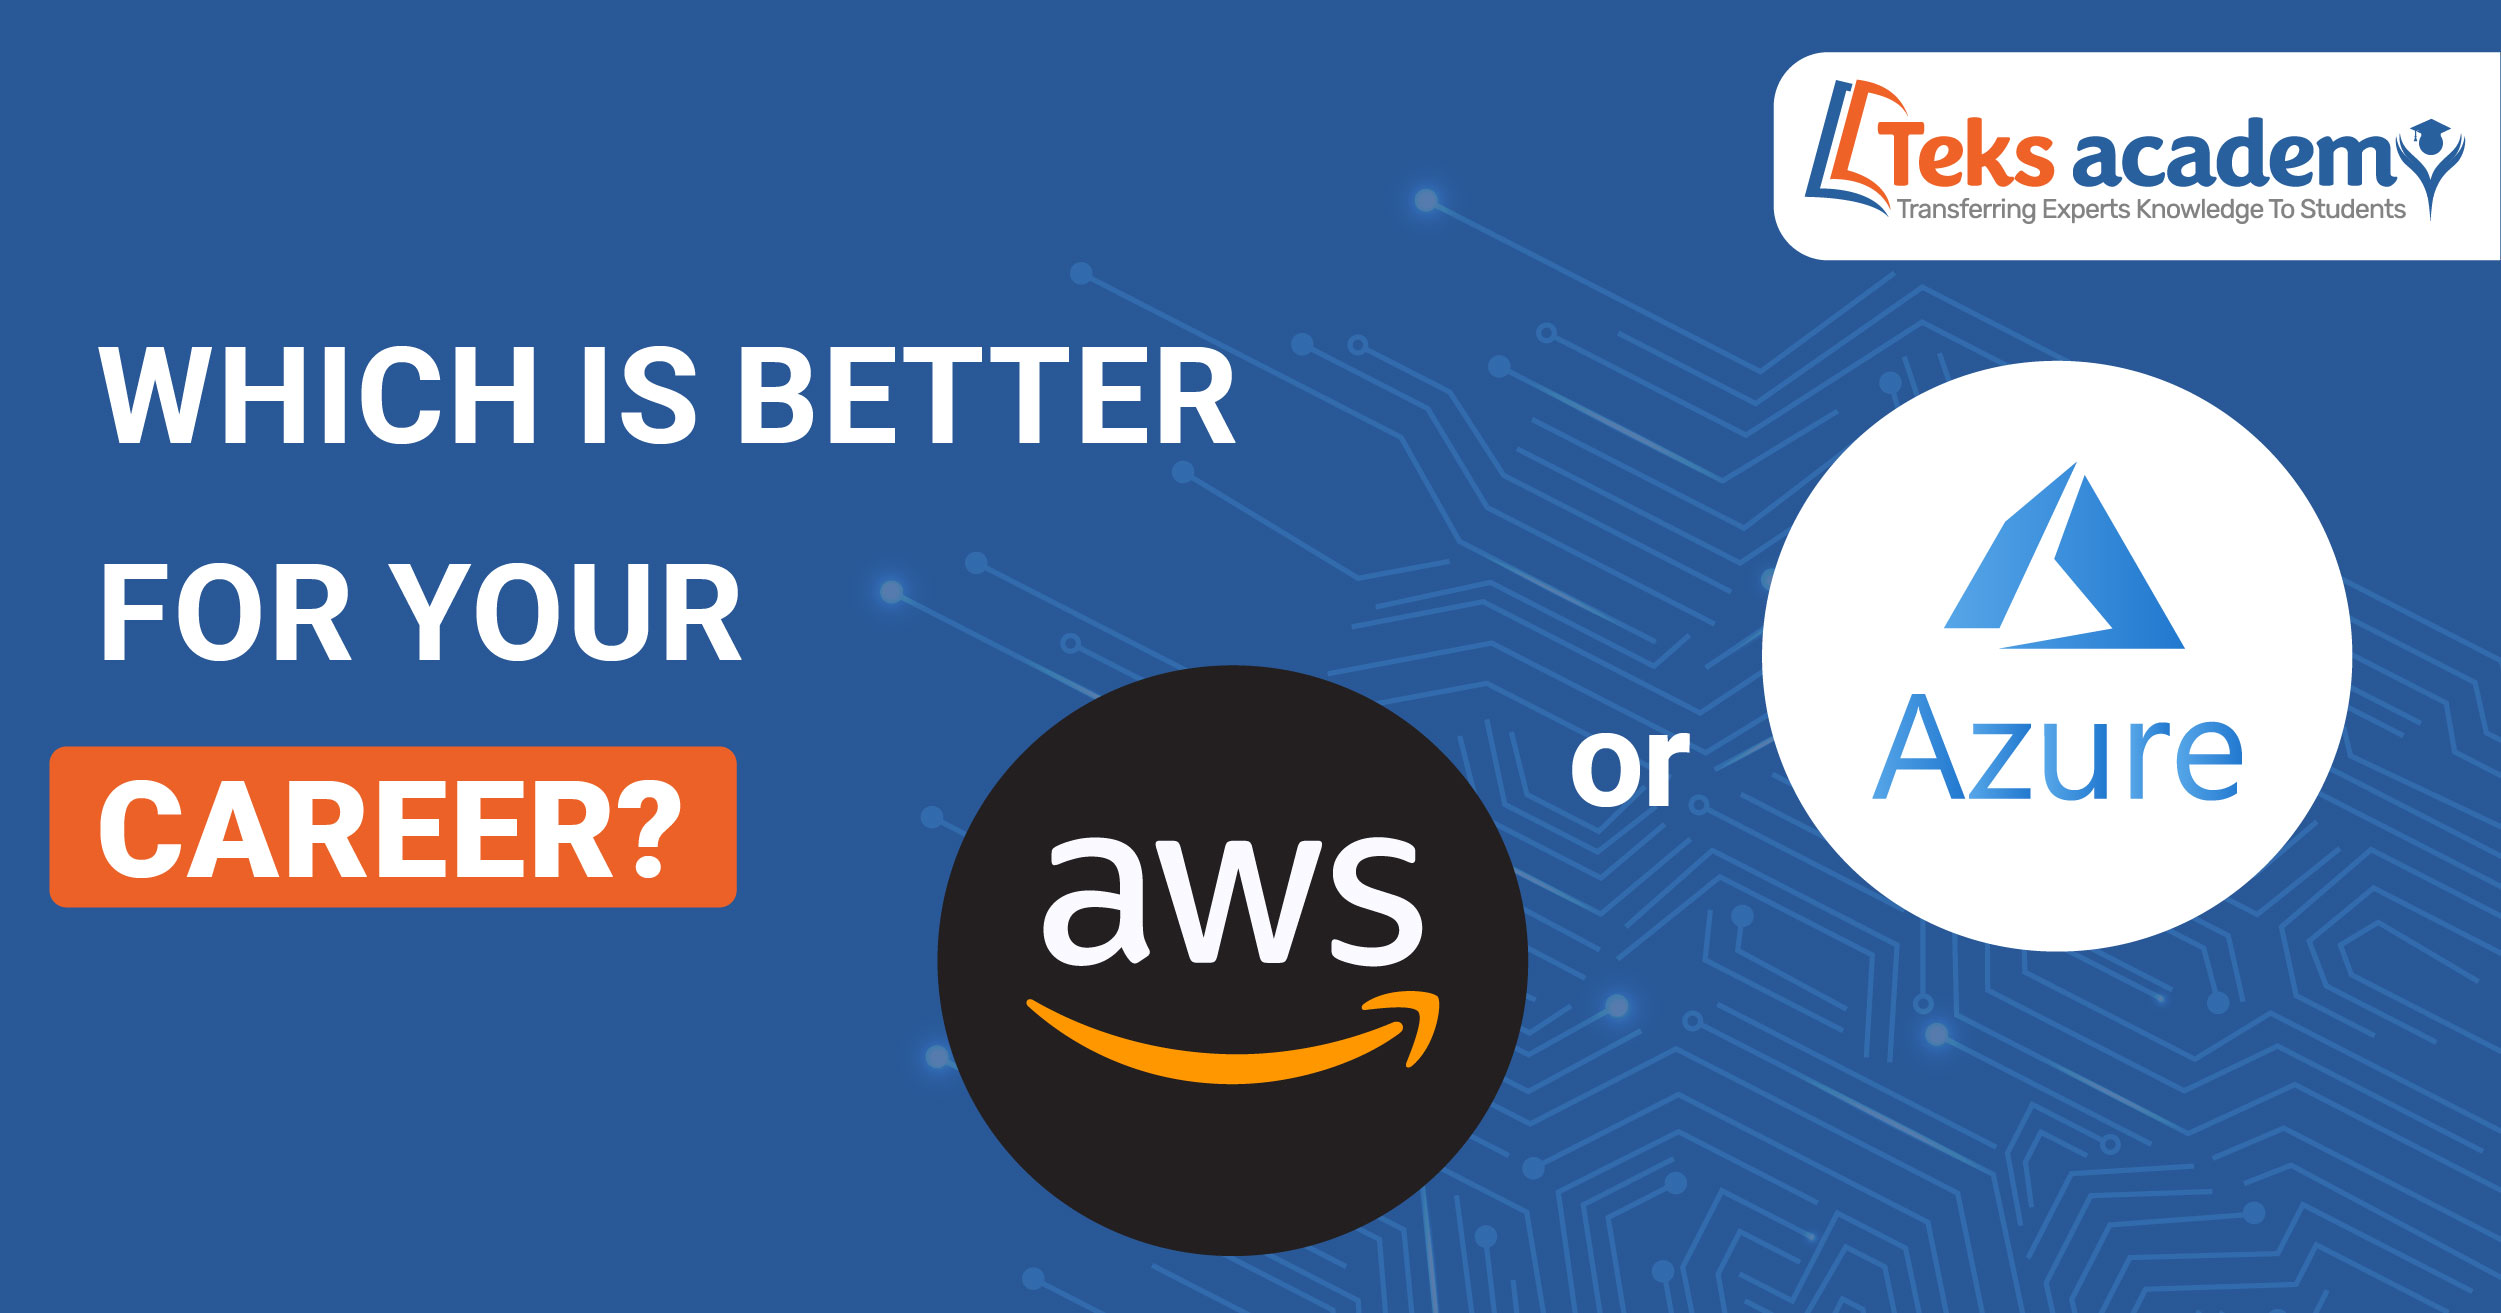 Which is Better for Your Career: AWS or Azure?